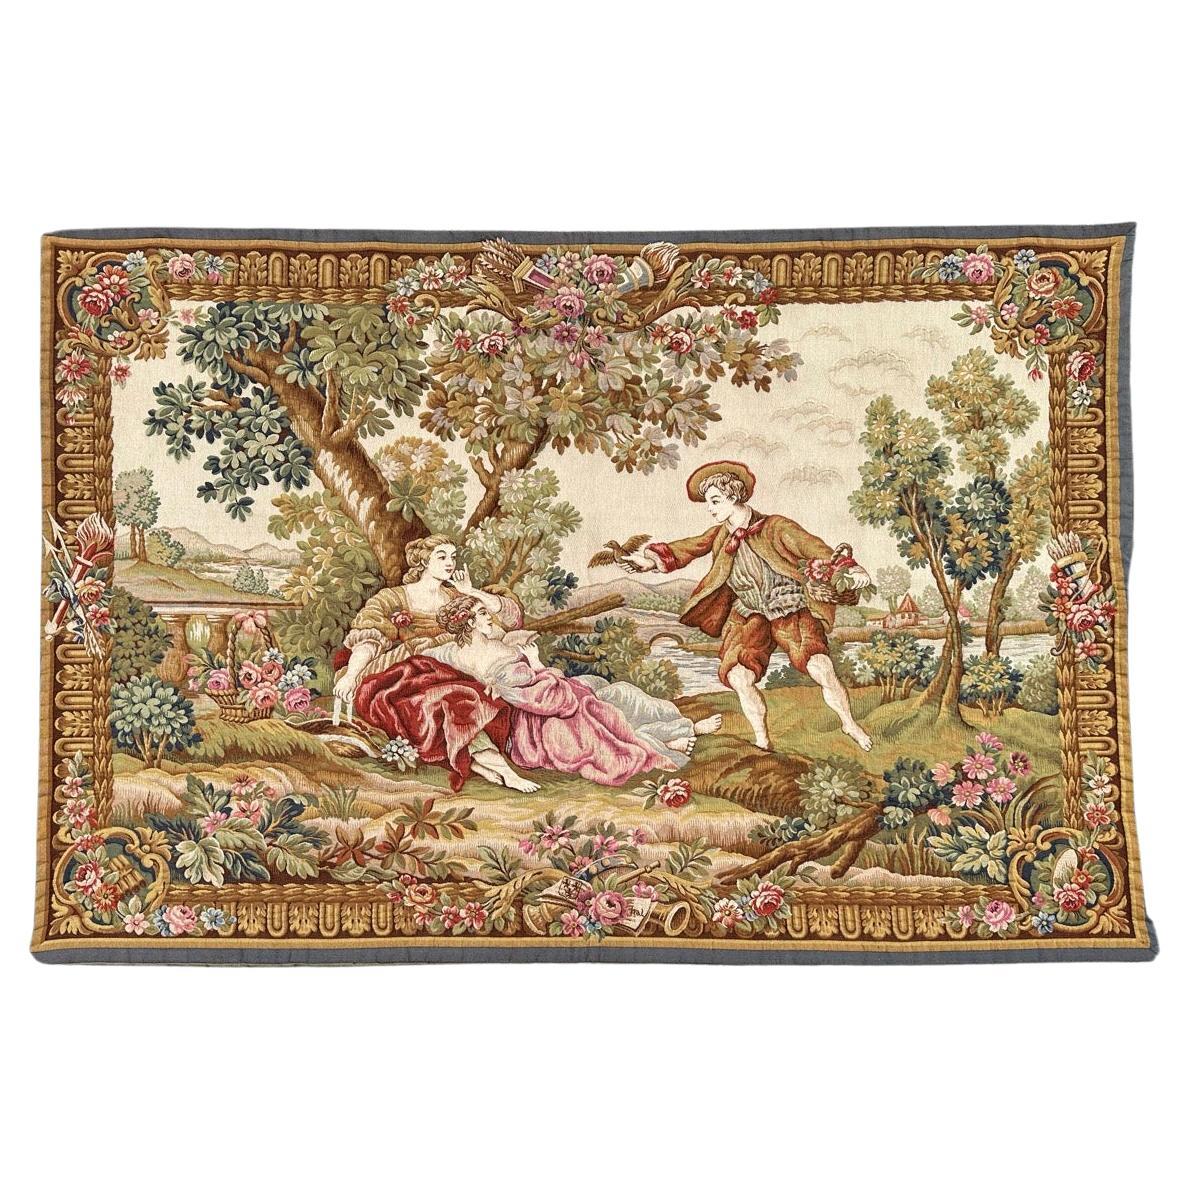 Bobyrug’s Nice Midcentury France Aubusson Style Jaquar Tapestry